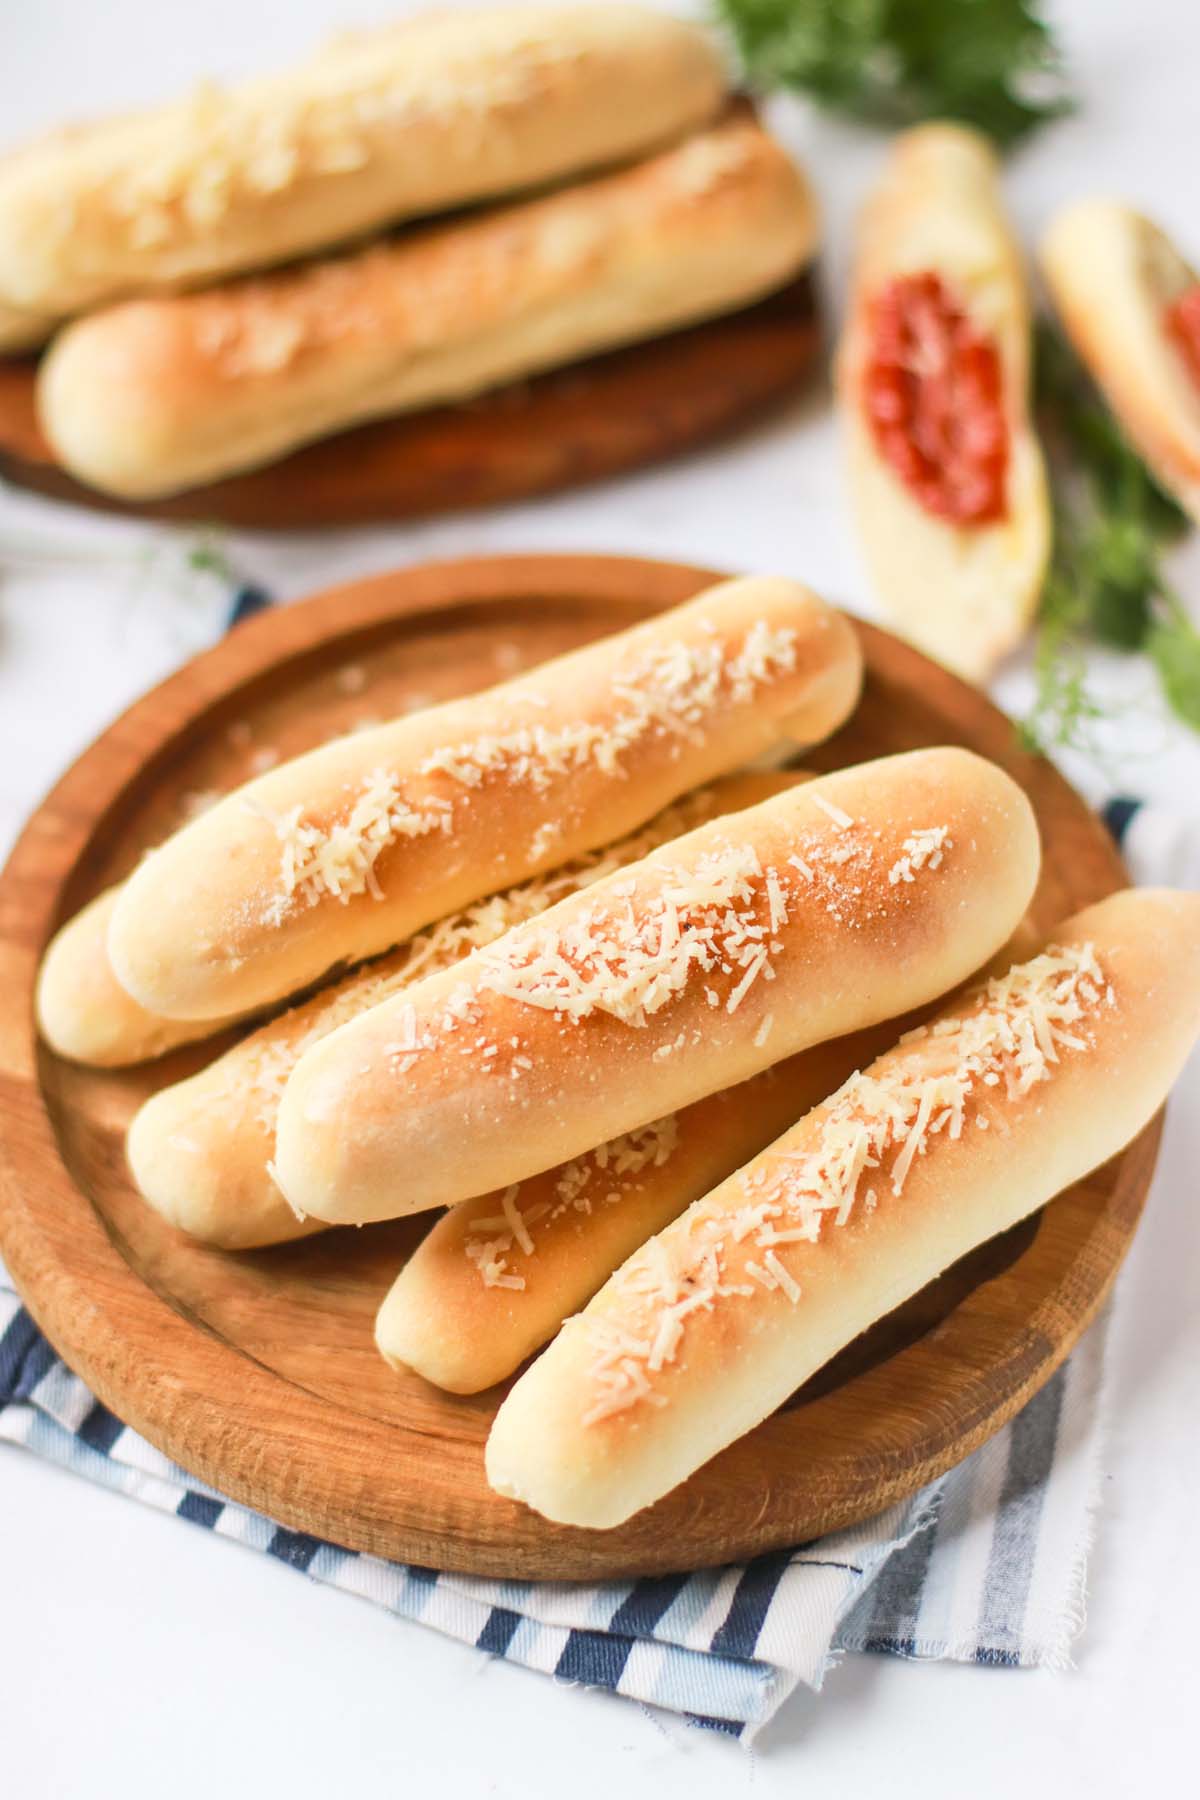 breadsticks topped with parmesan cheese.